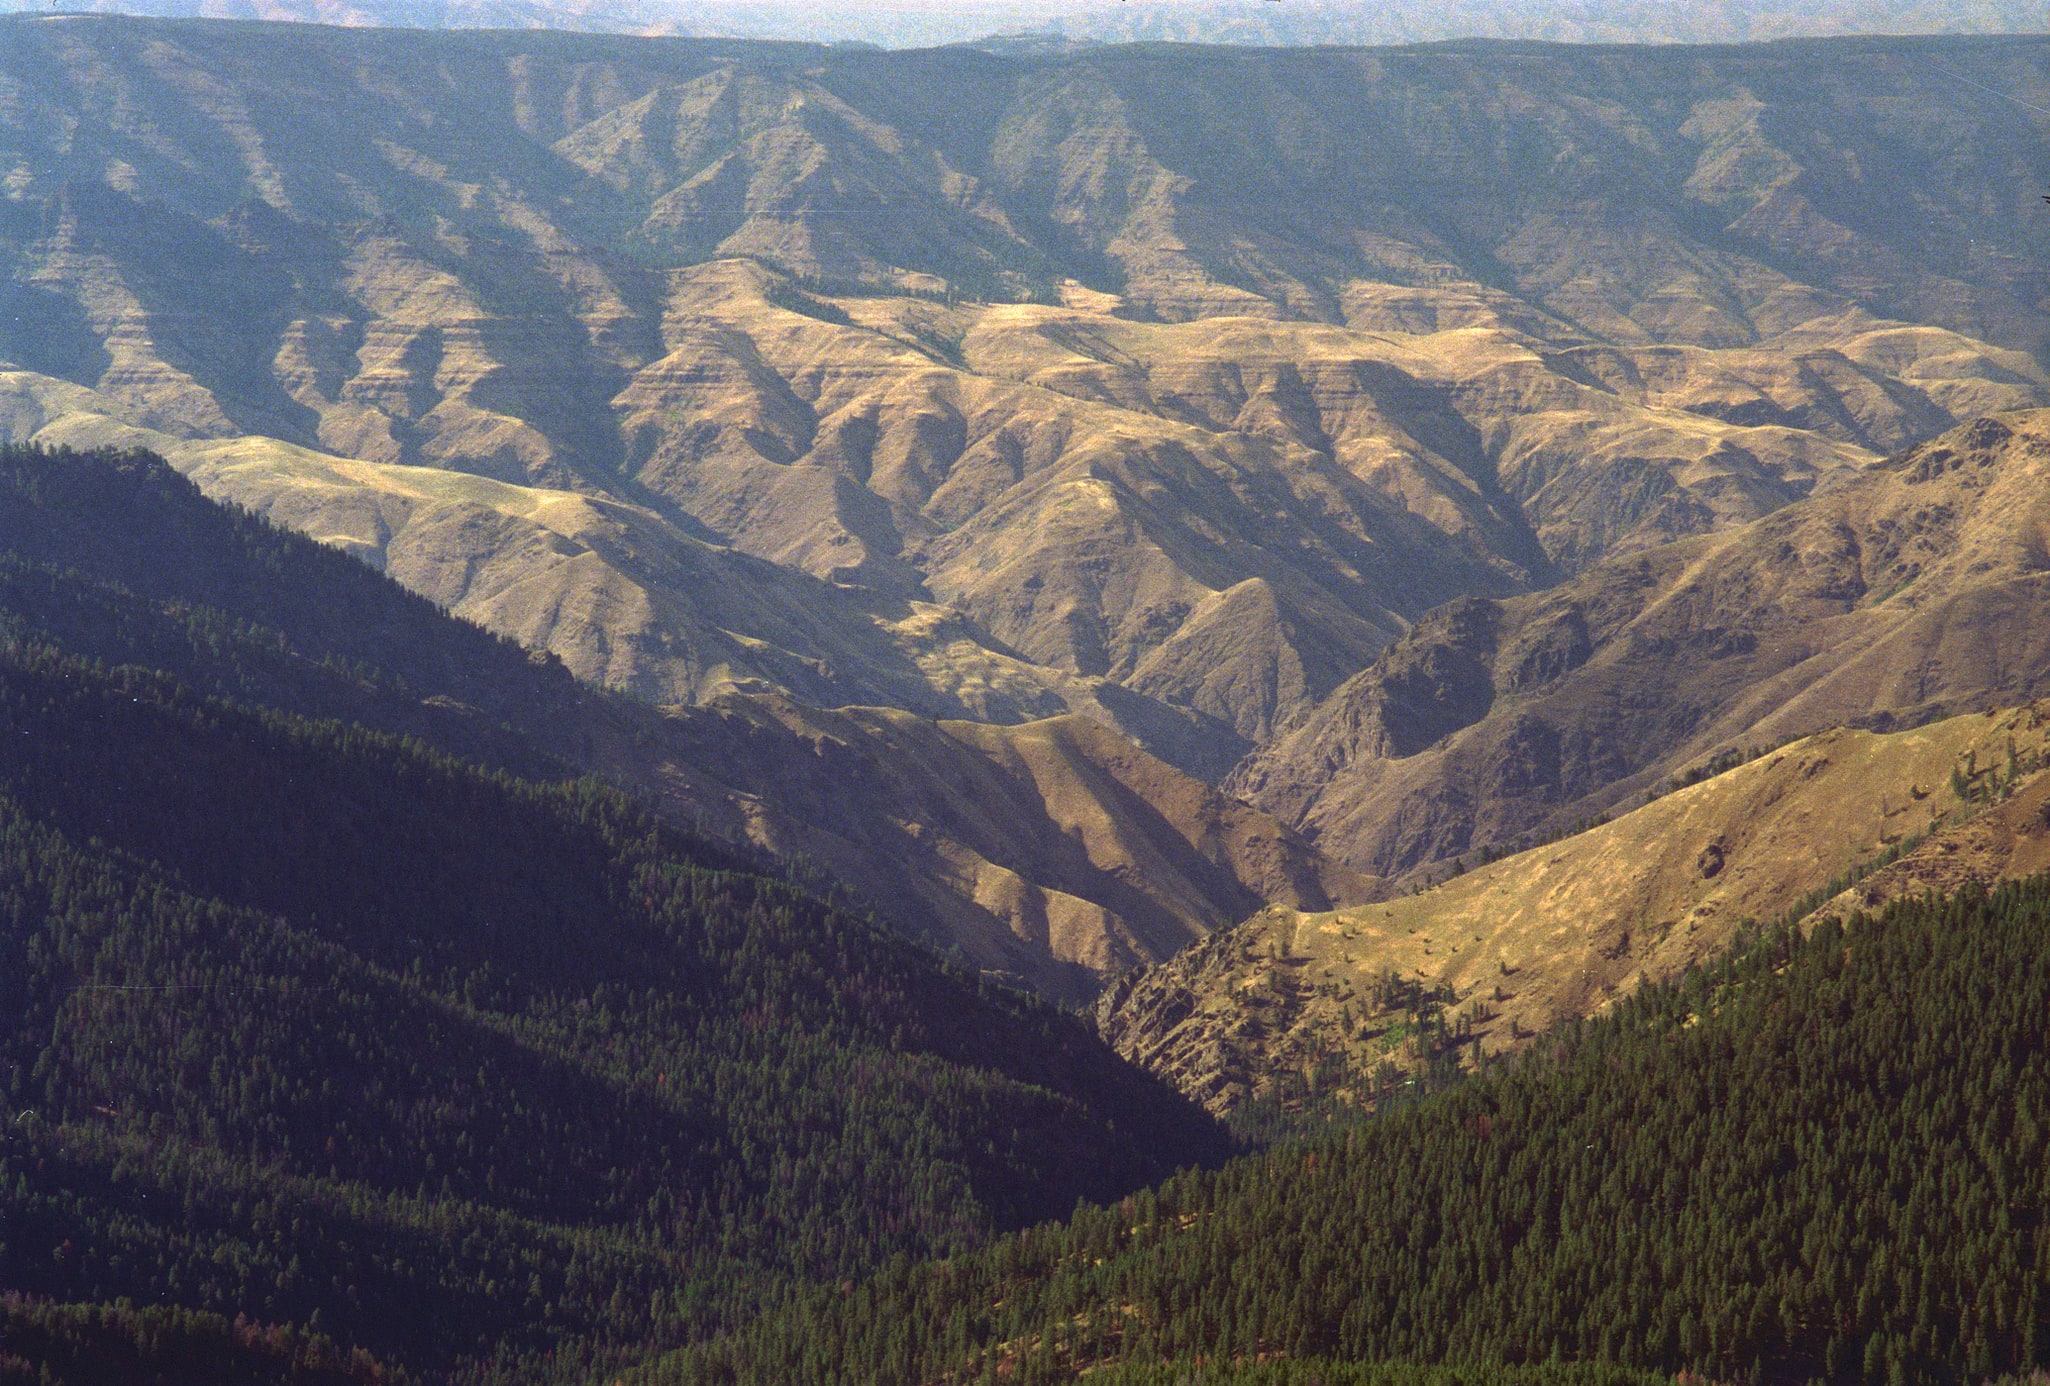 Hells Canyon Wilderness, United States